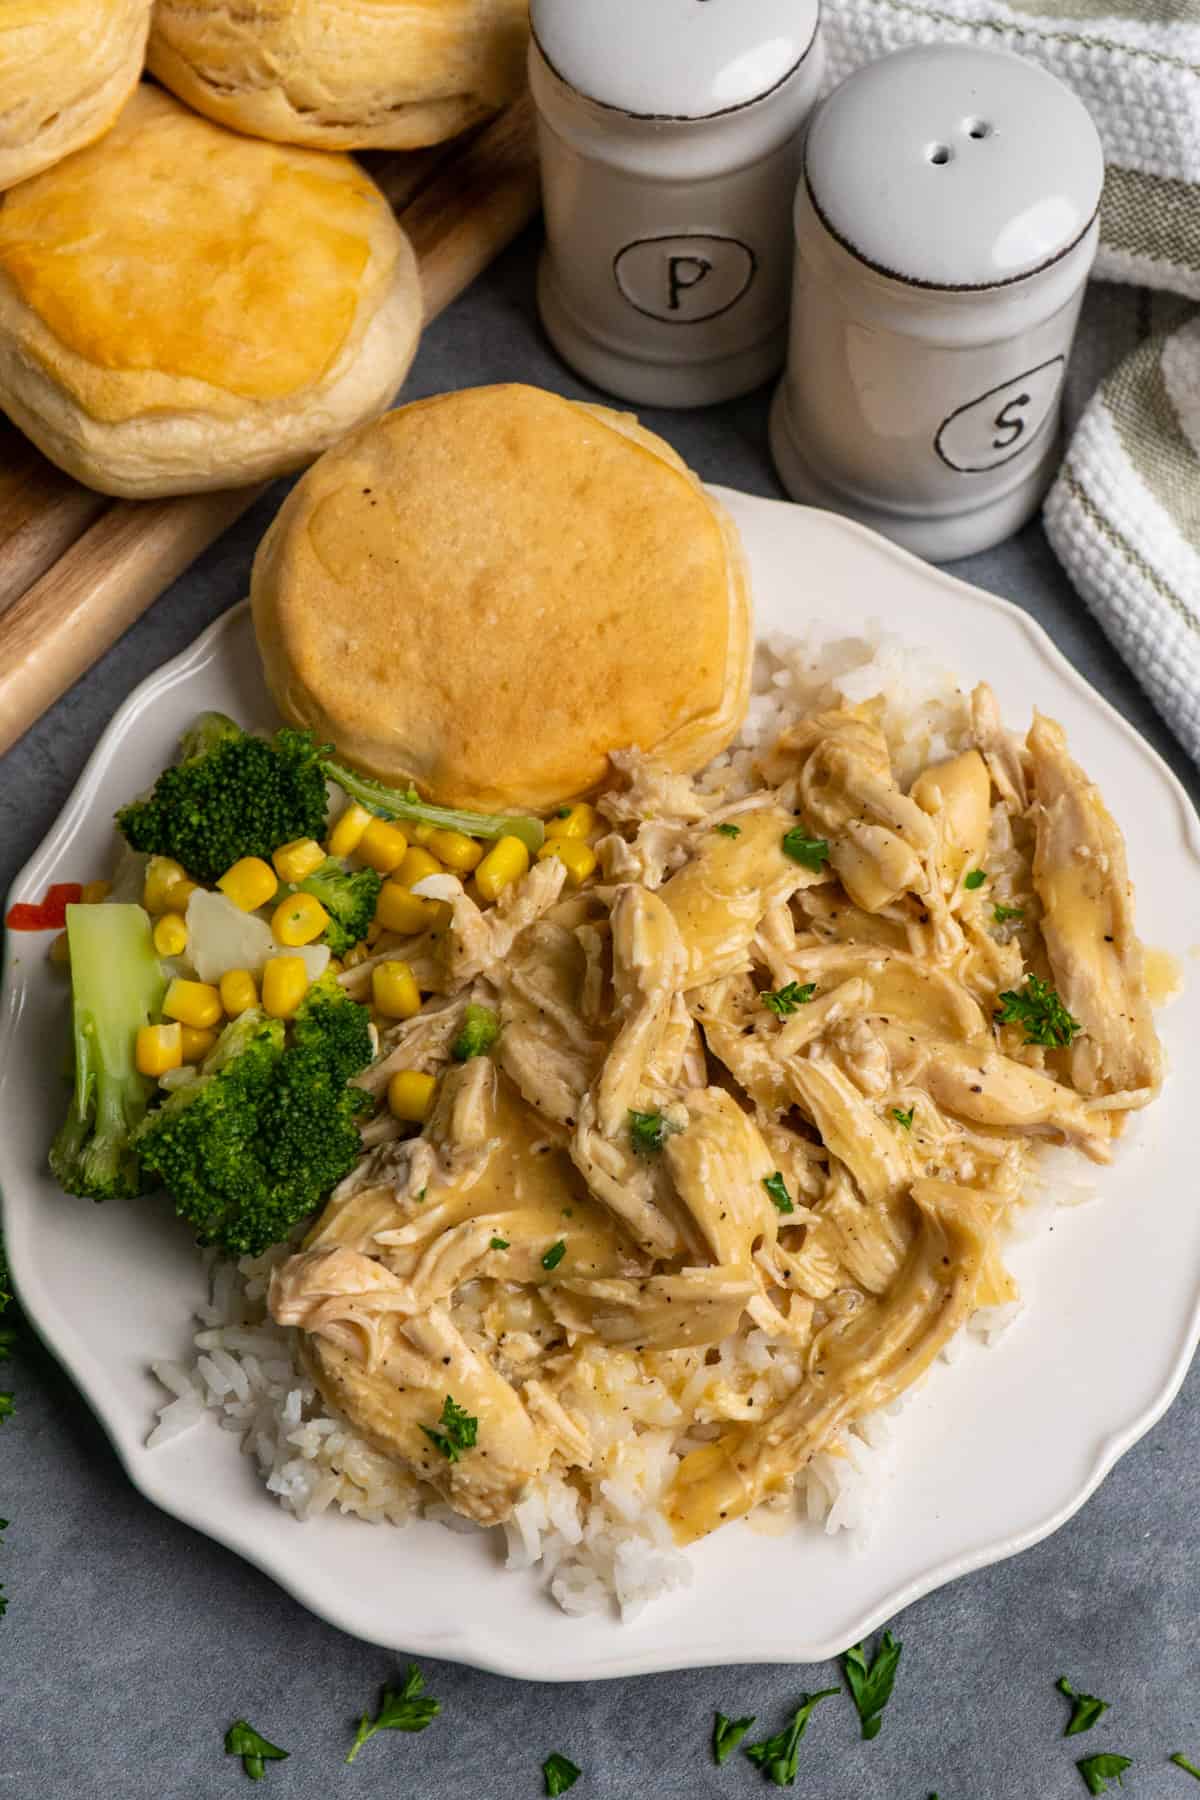 Shredded chicken over rice with gravy on top.